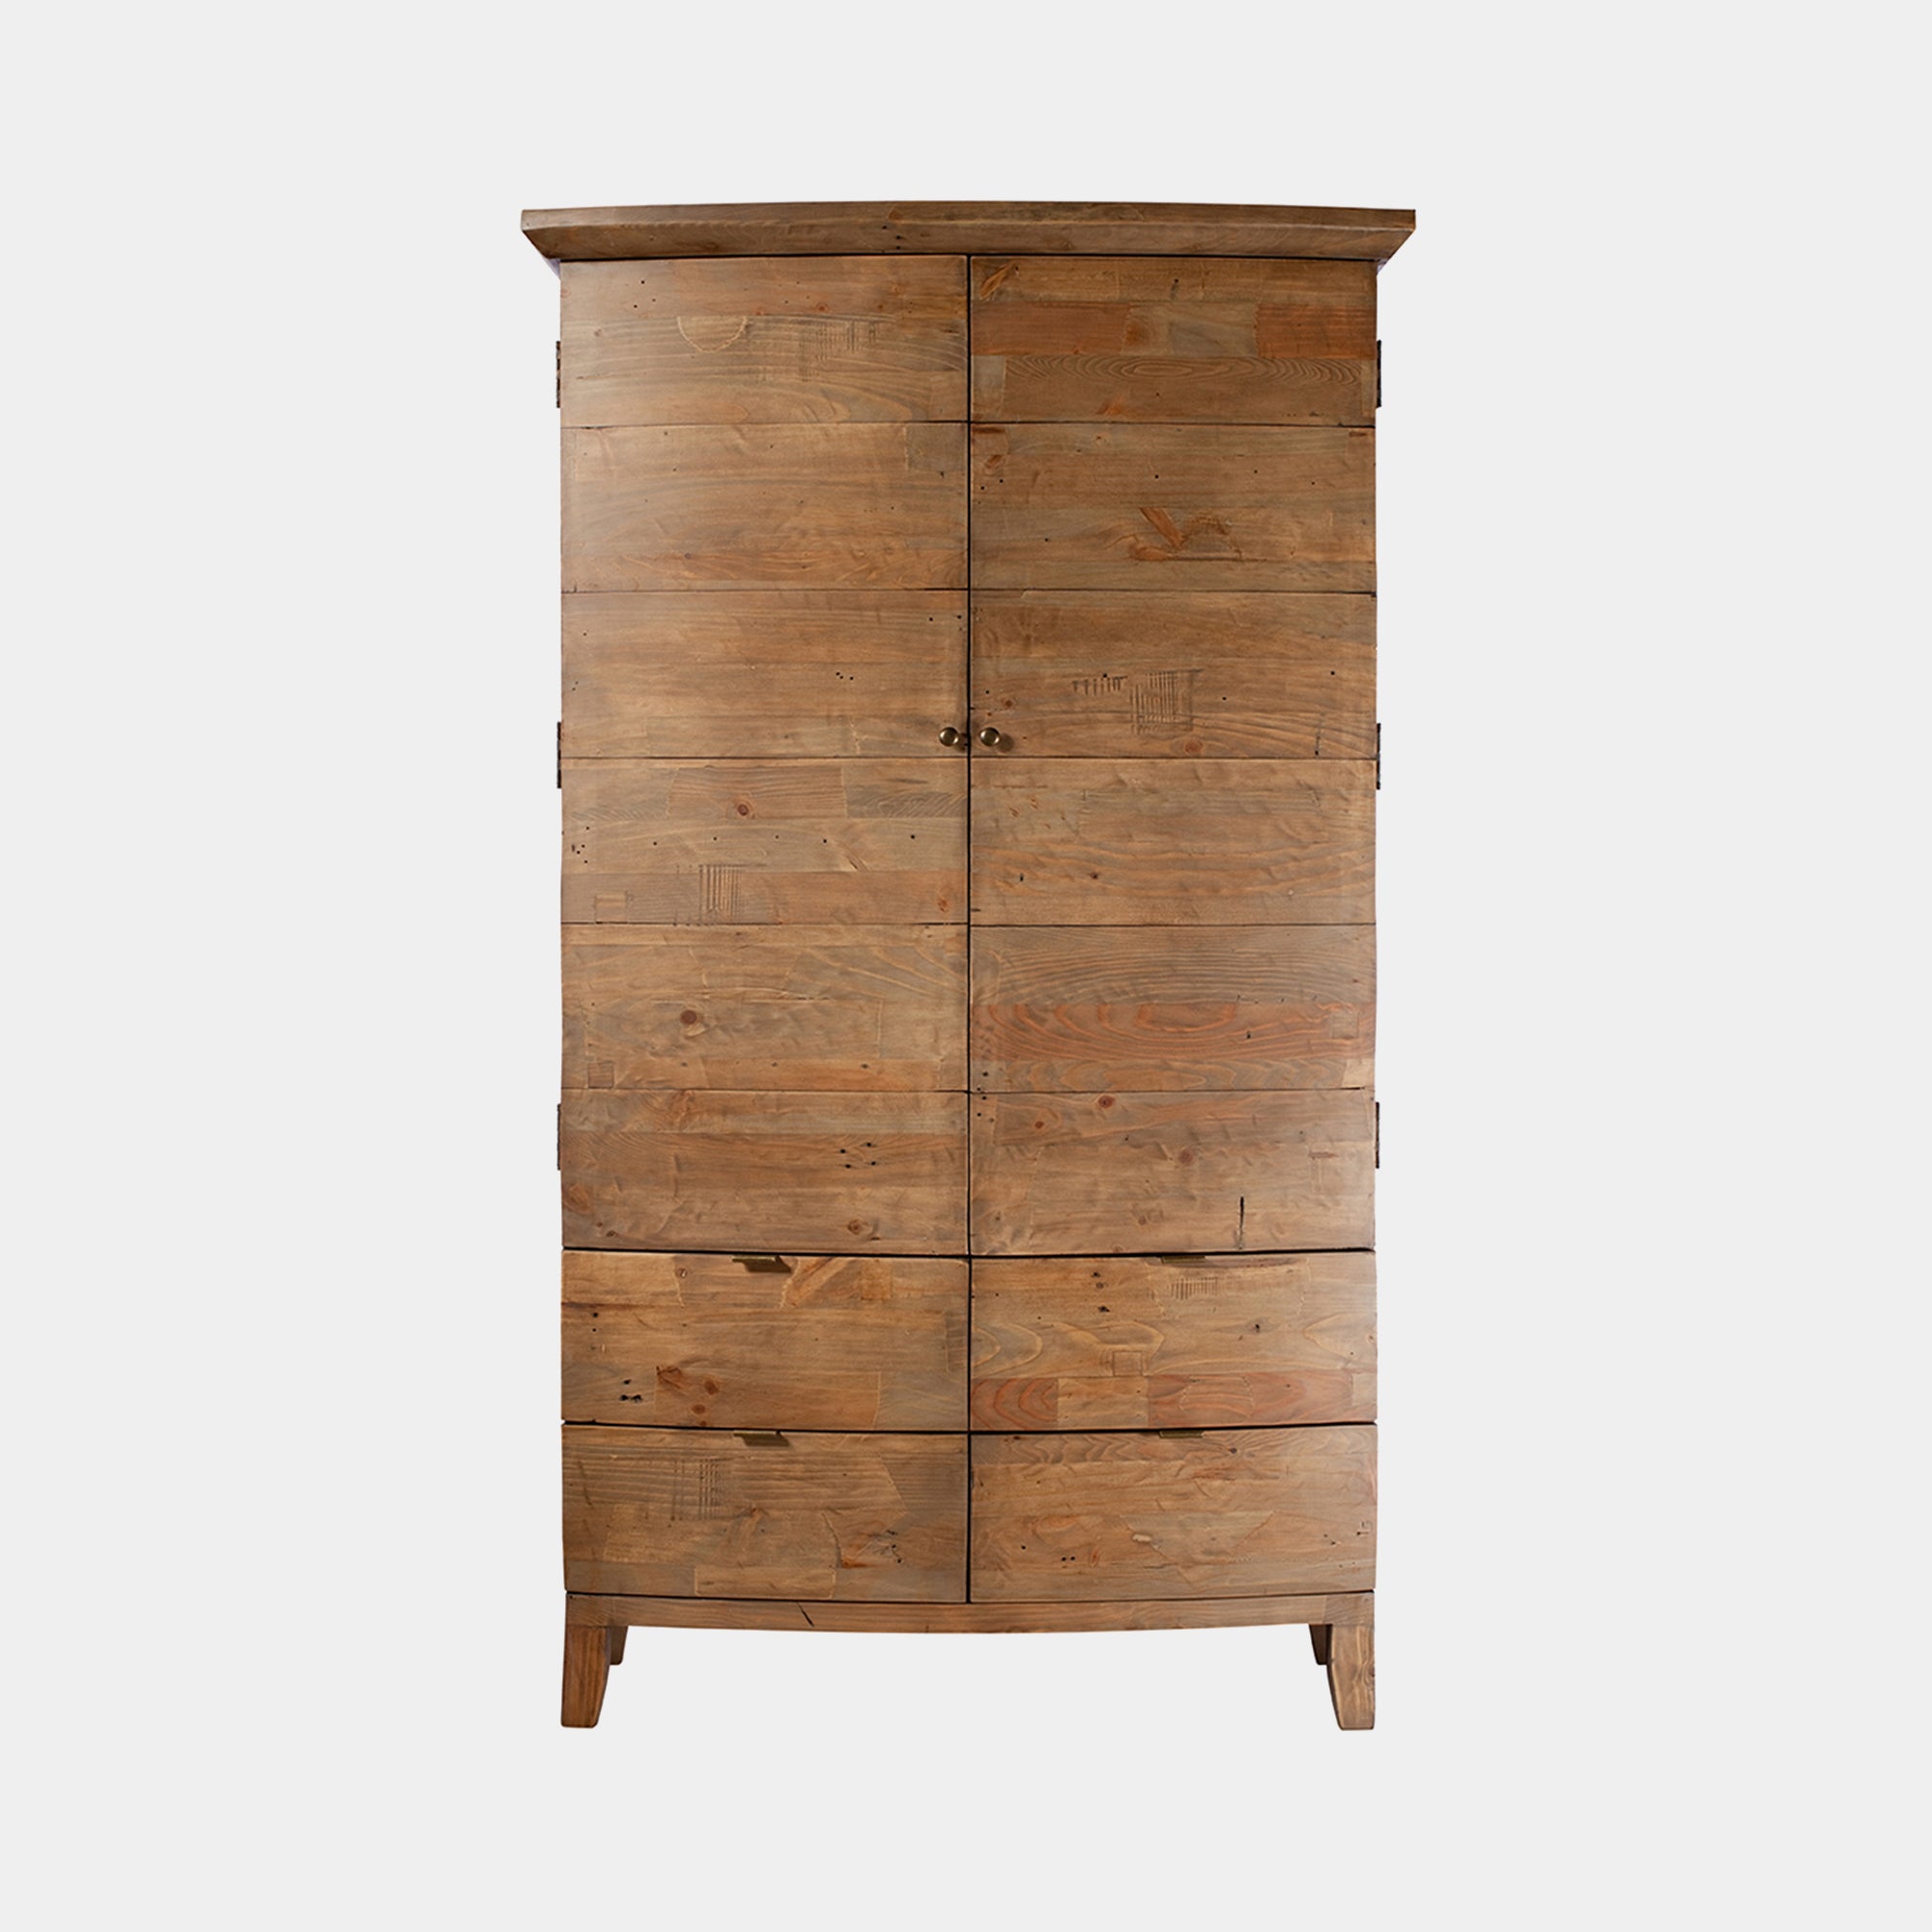 Large Double Wardrobe, Reclaimed Timbers In Sundried Wheat Finish